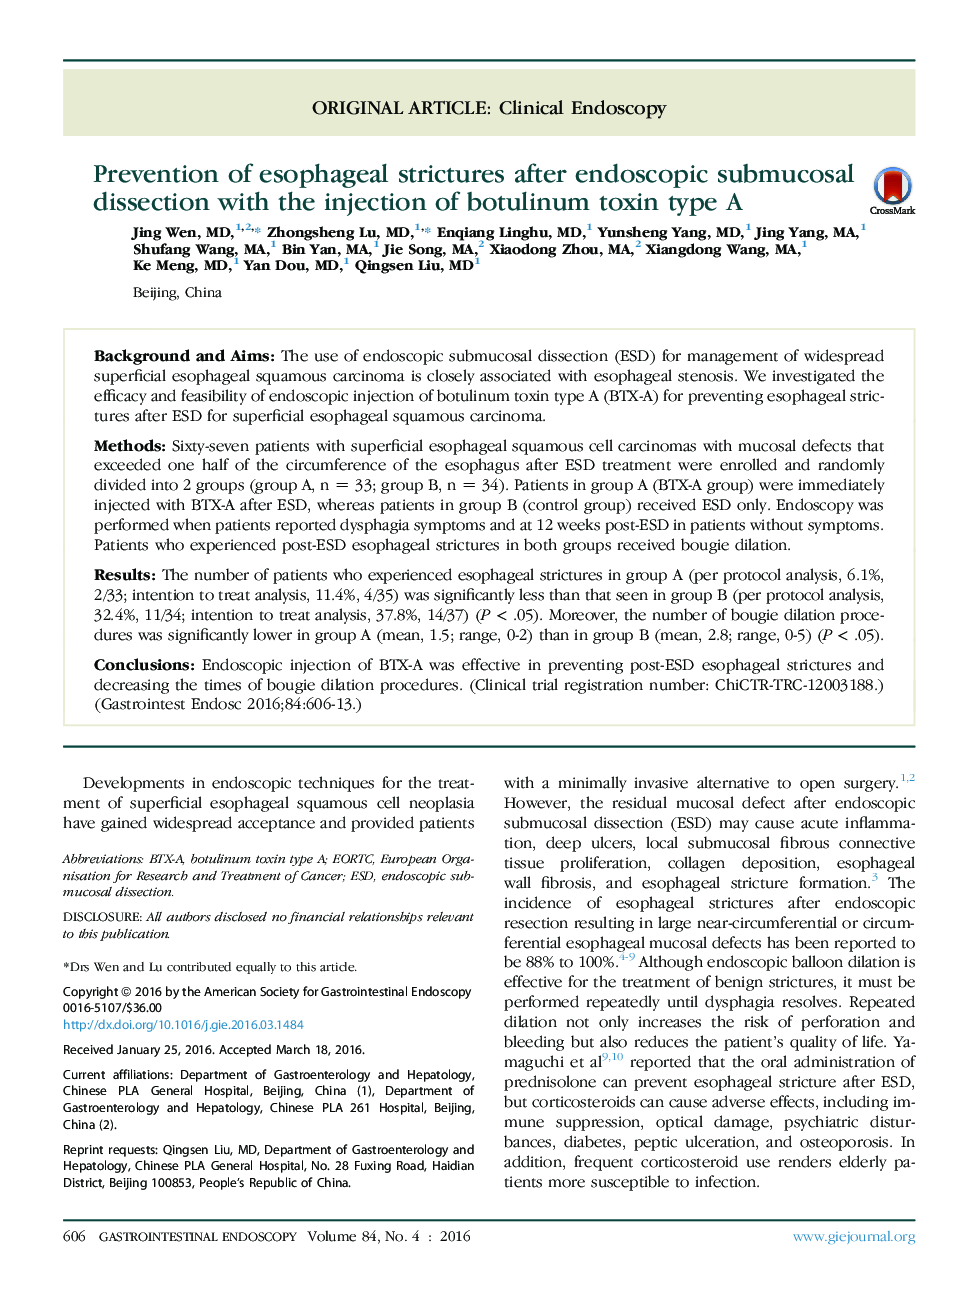 Prevention of esophageal strictures after endoscopic submucosal dissection with the injection of botulinum toxin type A